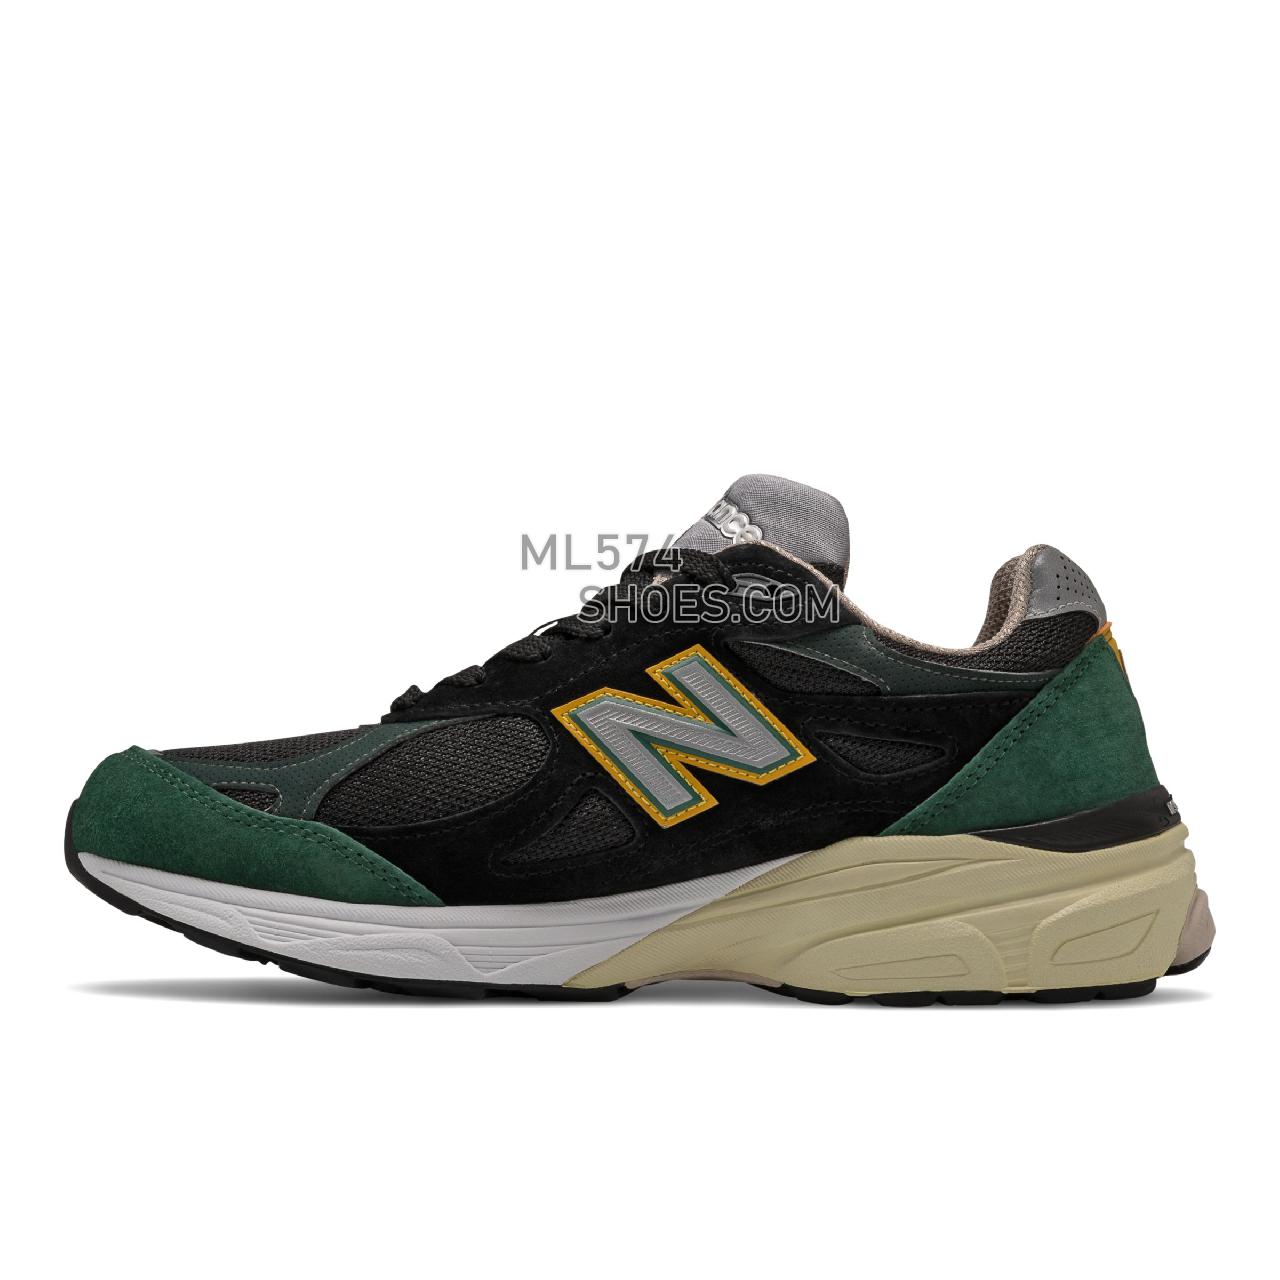 New Balance Made in USA 990v3 - Men's Made in USA And UK Sneakers - Black with Green - M990CP3